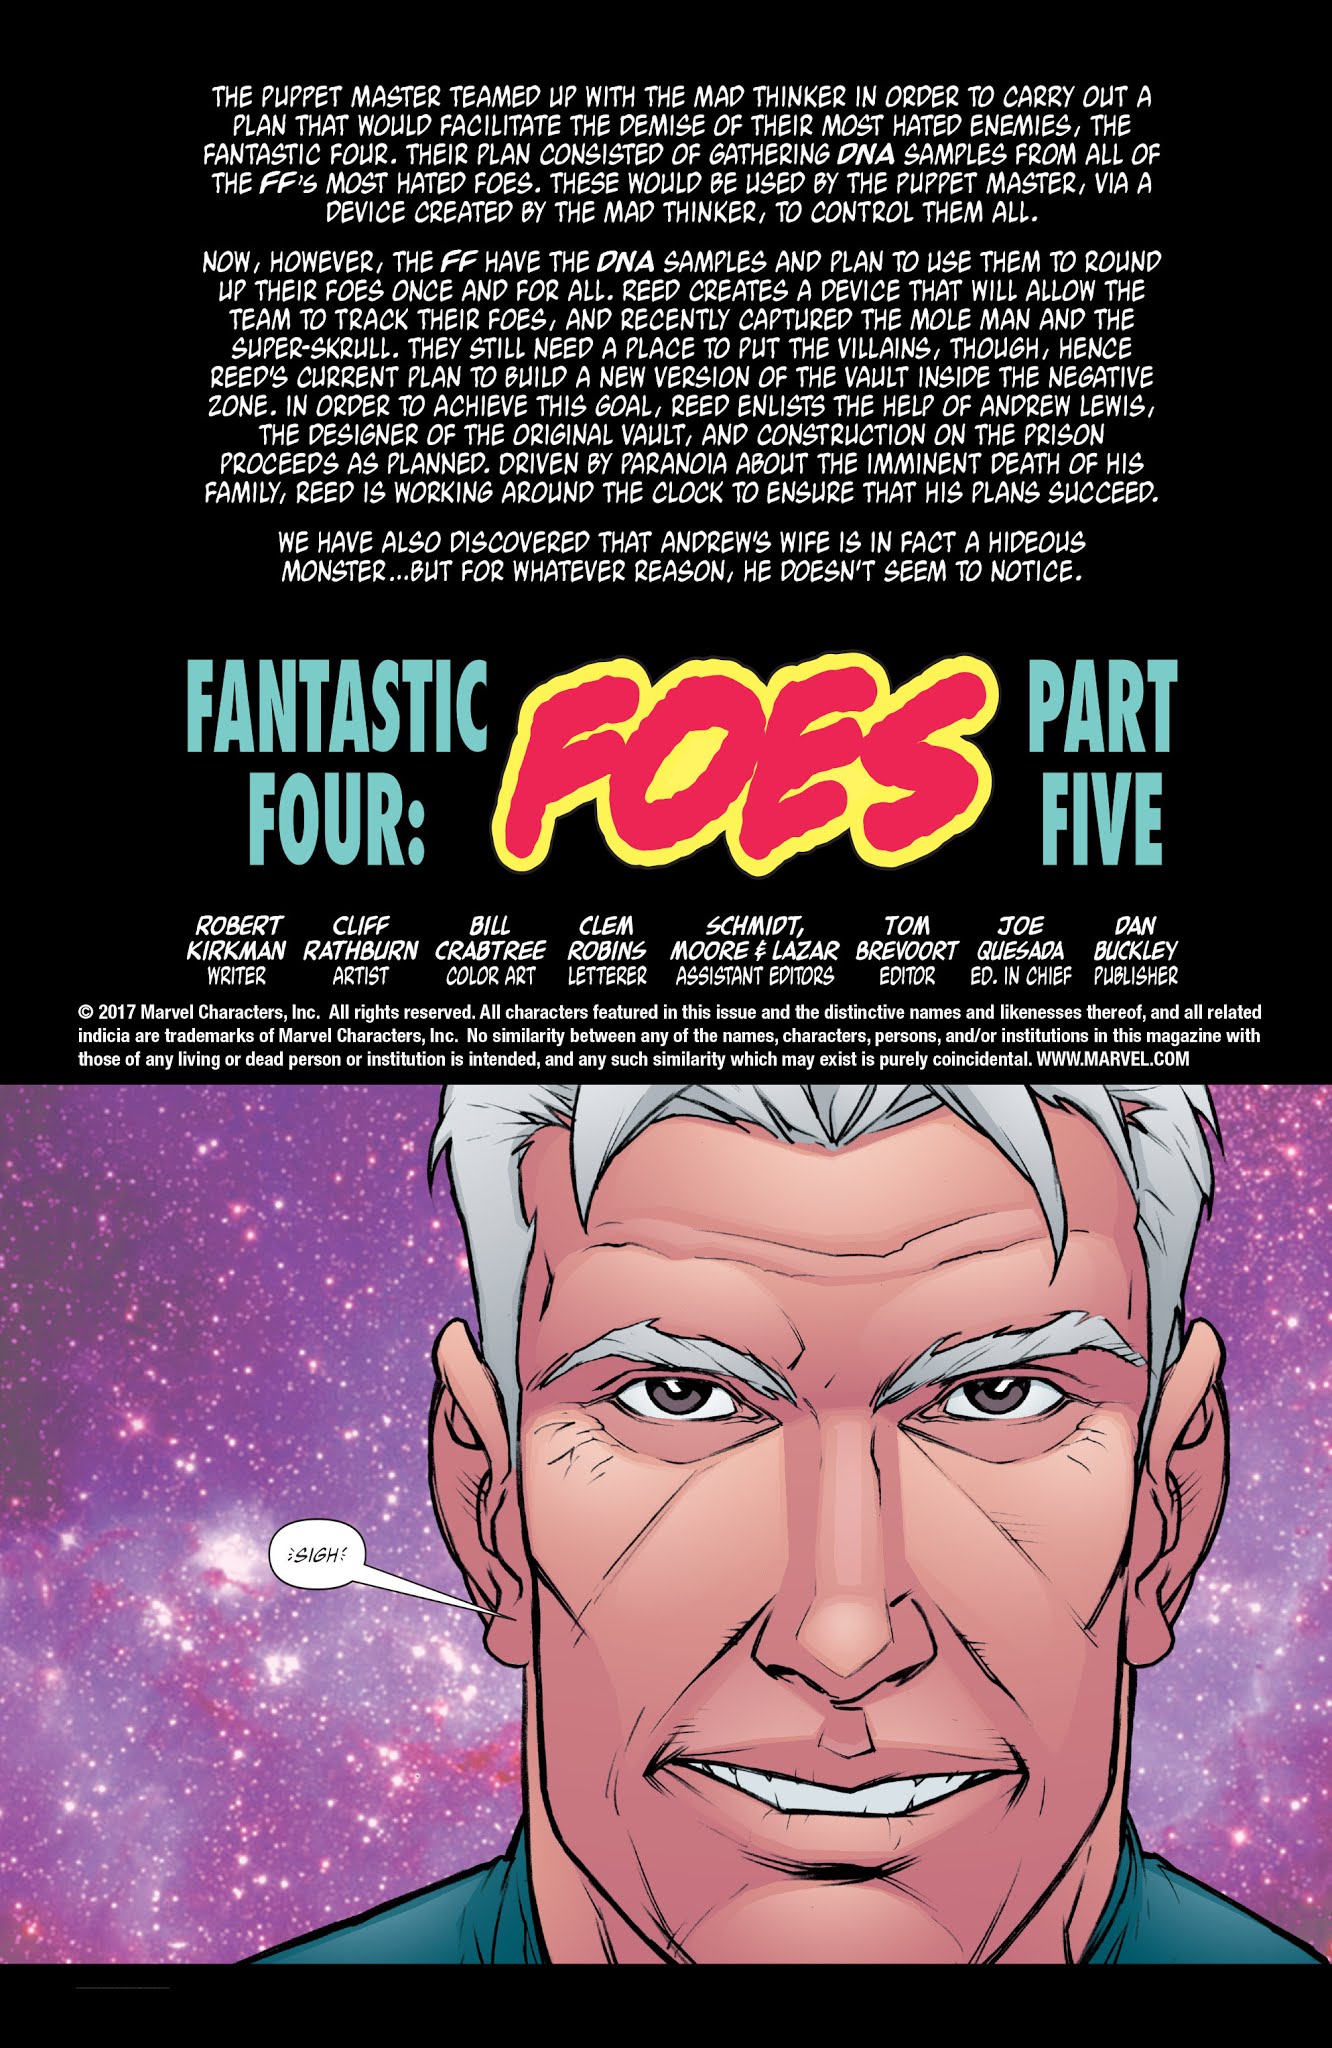 Read online Fantastic Four: Foes comic -  Issue #5 - 2